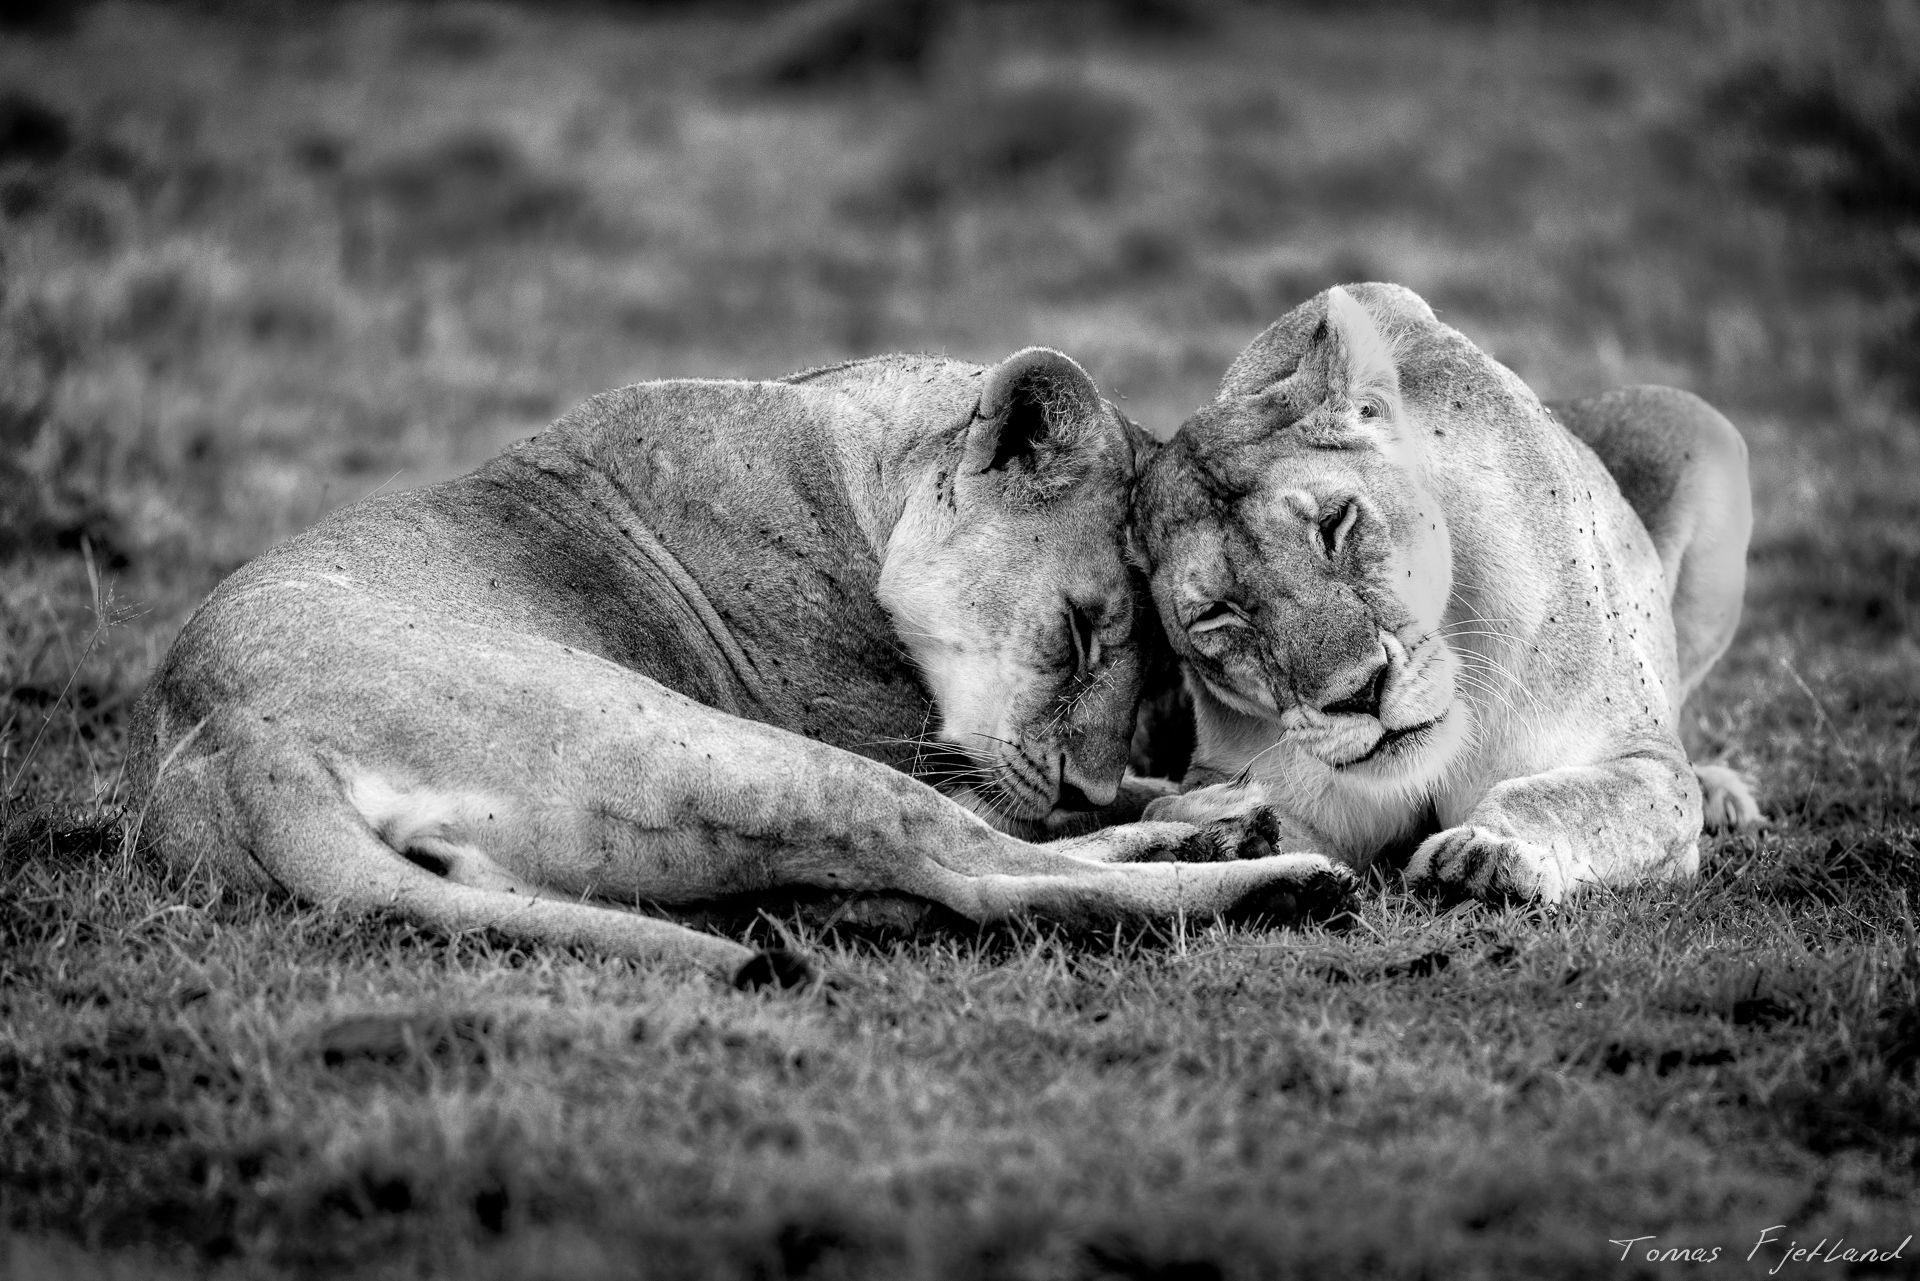 Two lionesses had separated from the pride, possibly to hunt and where taking a rest before the sun came up